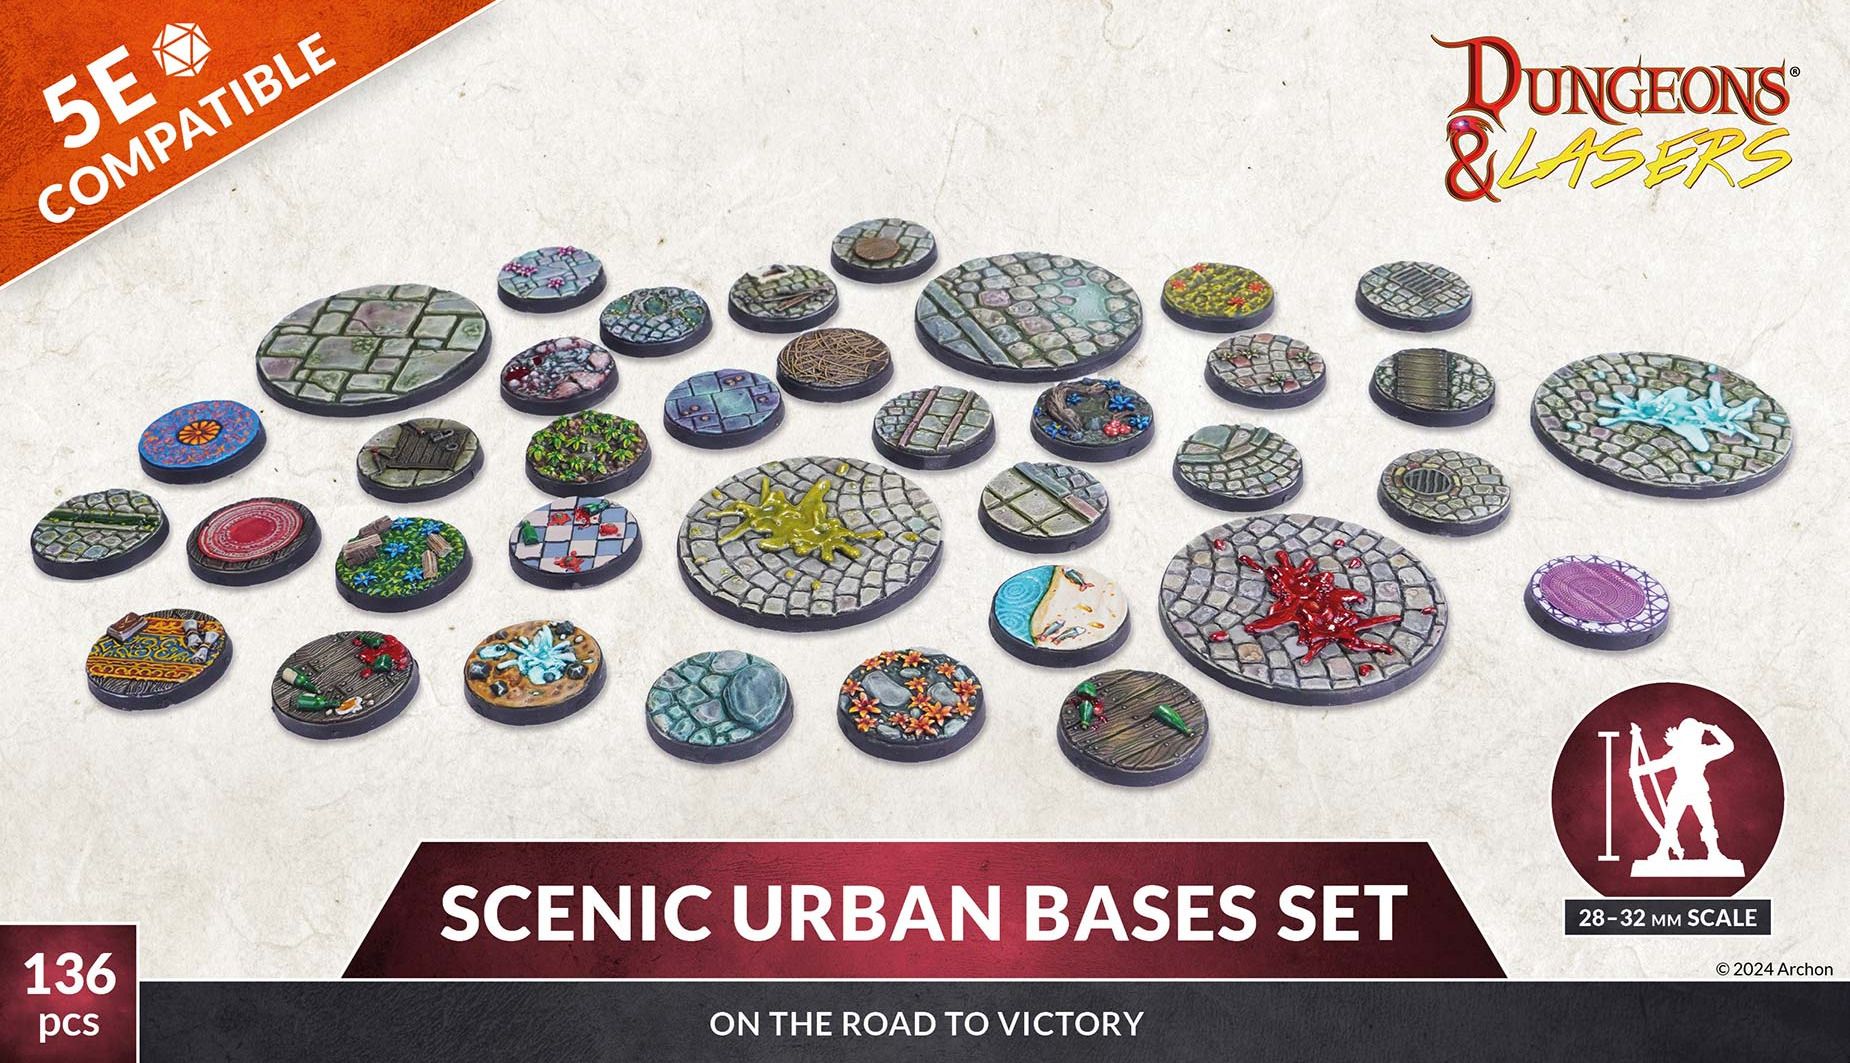 Dungeons & Lasers: Scenic Urban Bases Set 